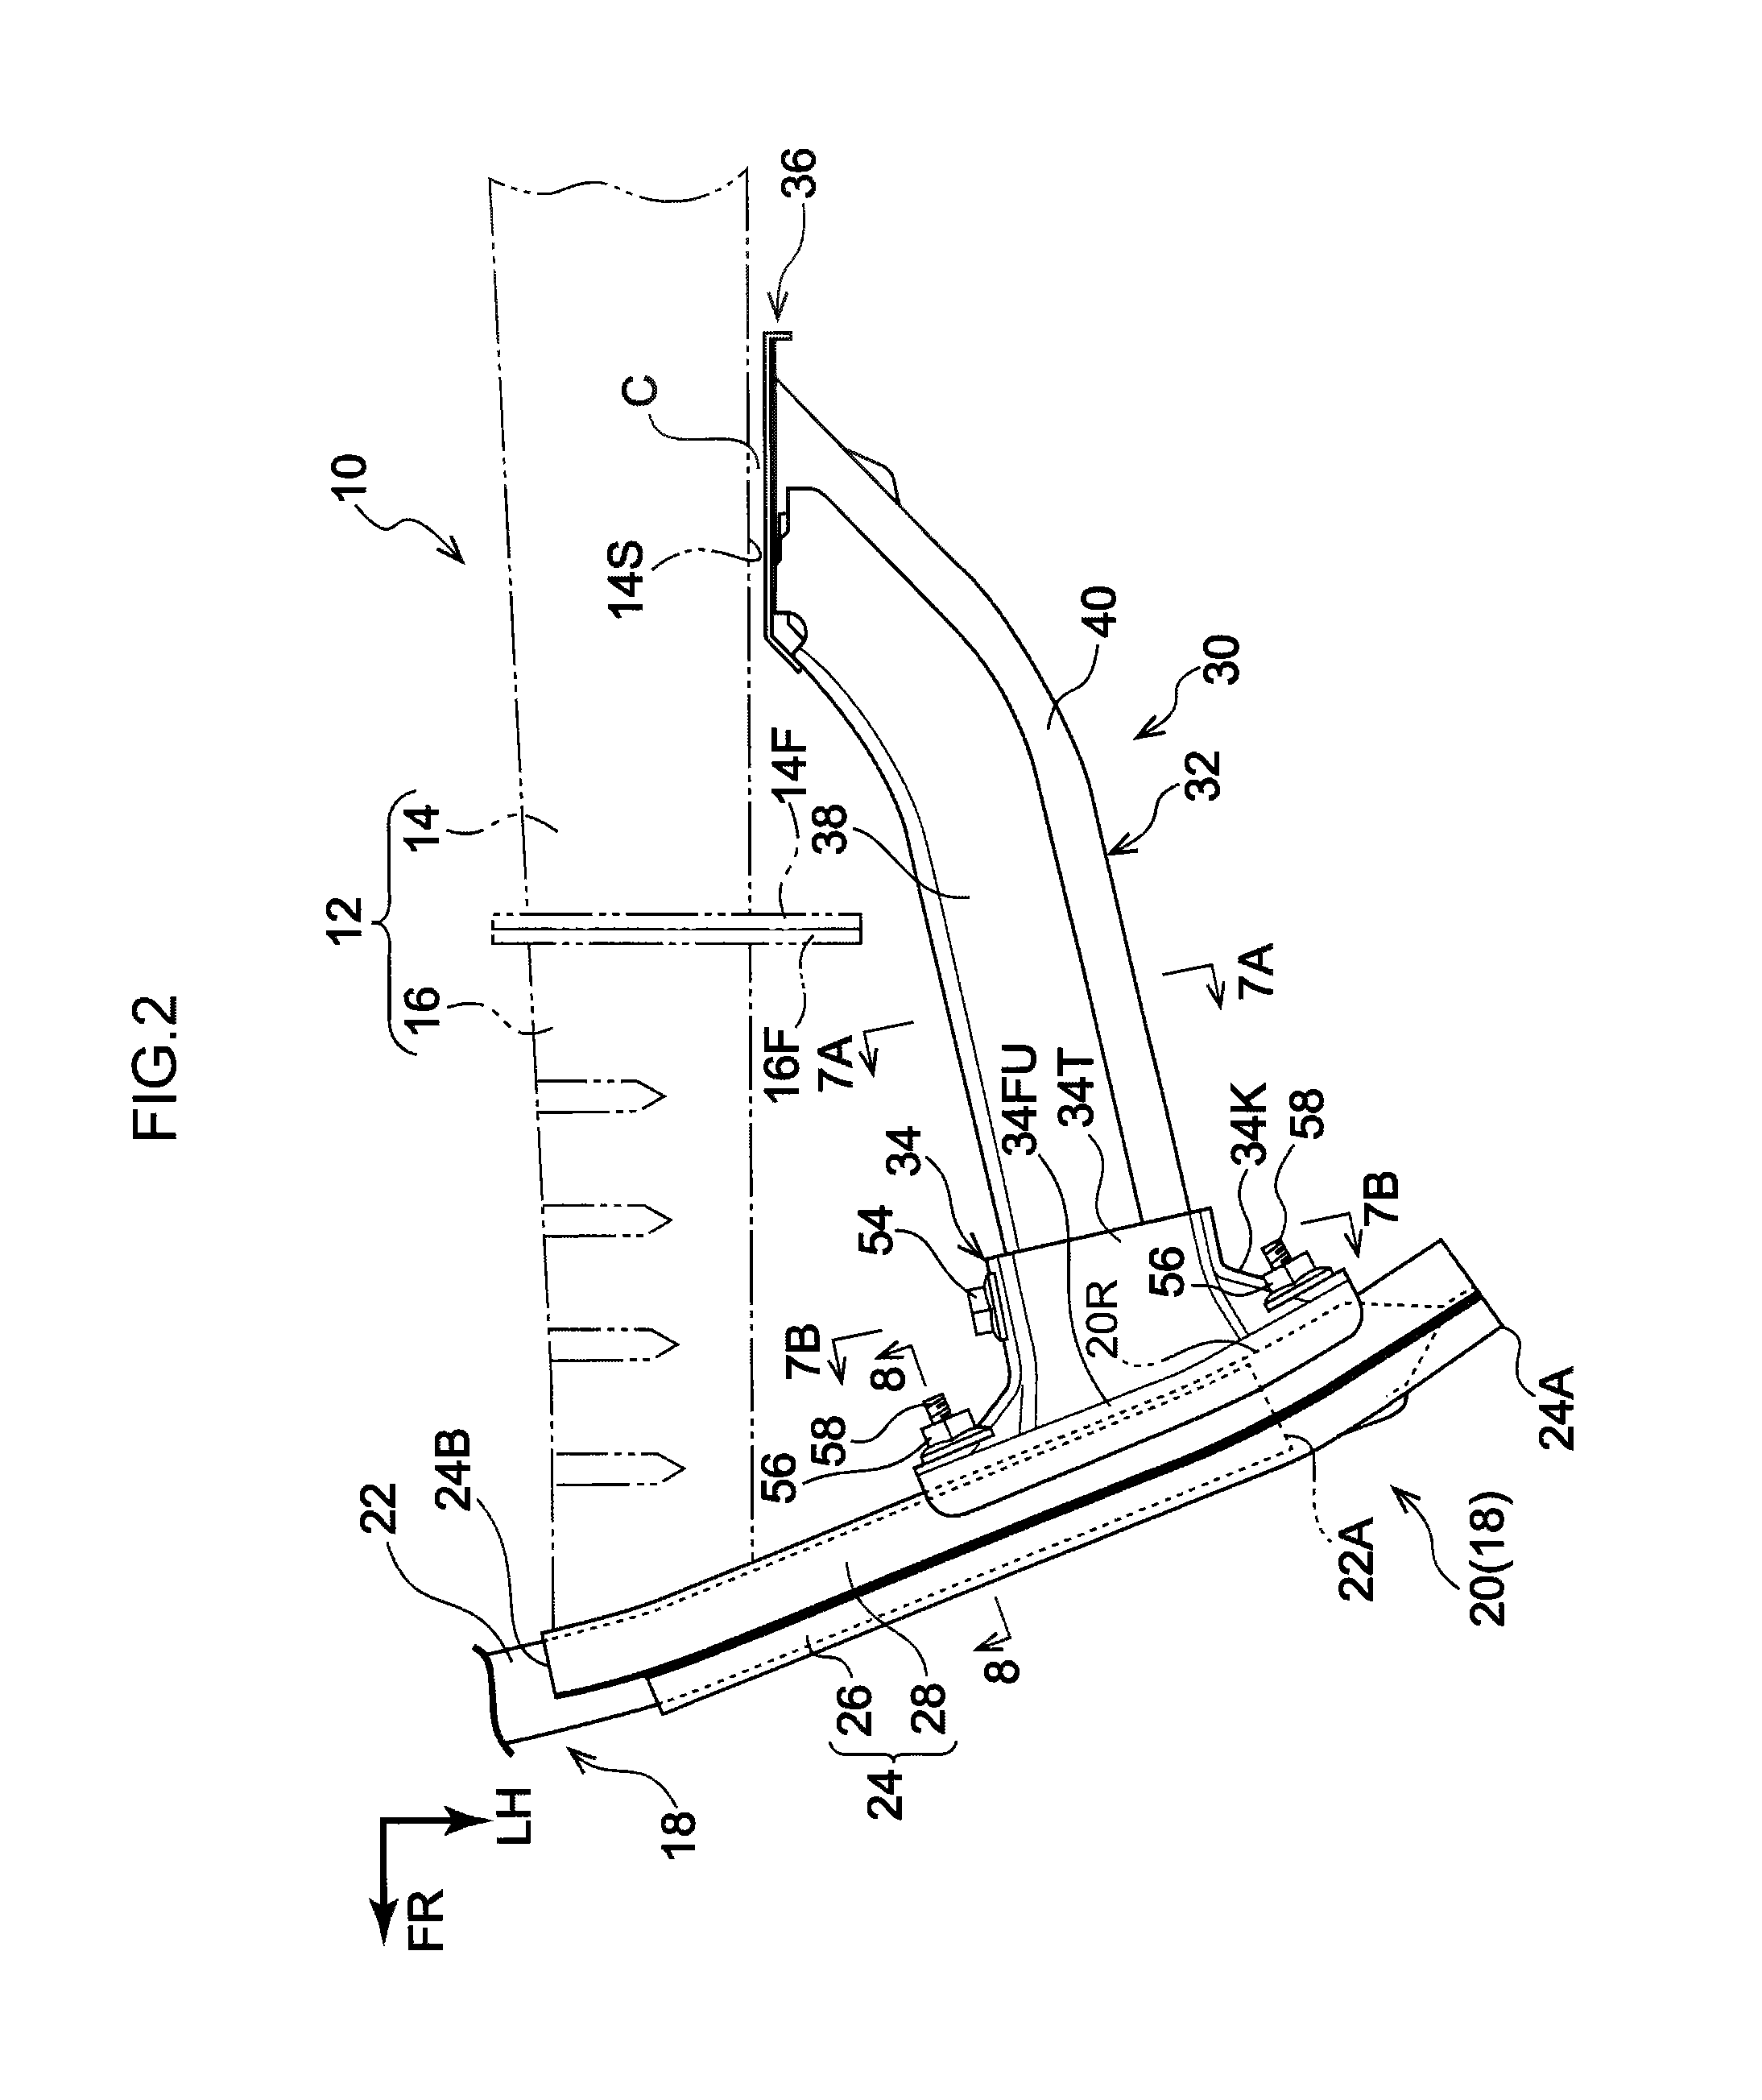 Vehicle body end section structure